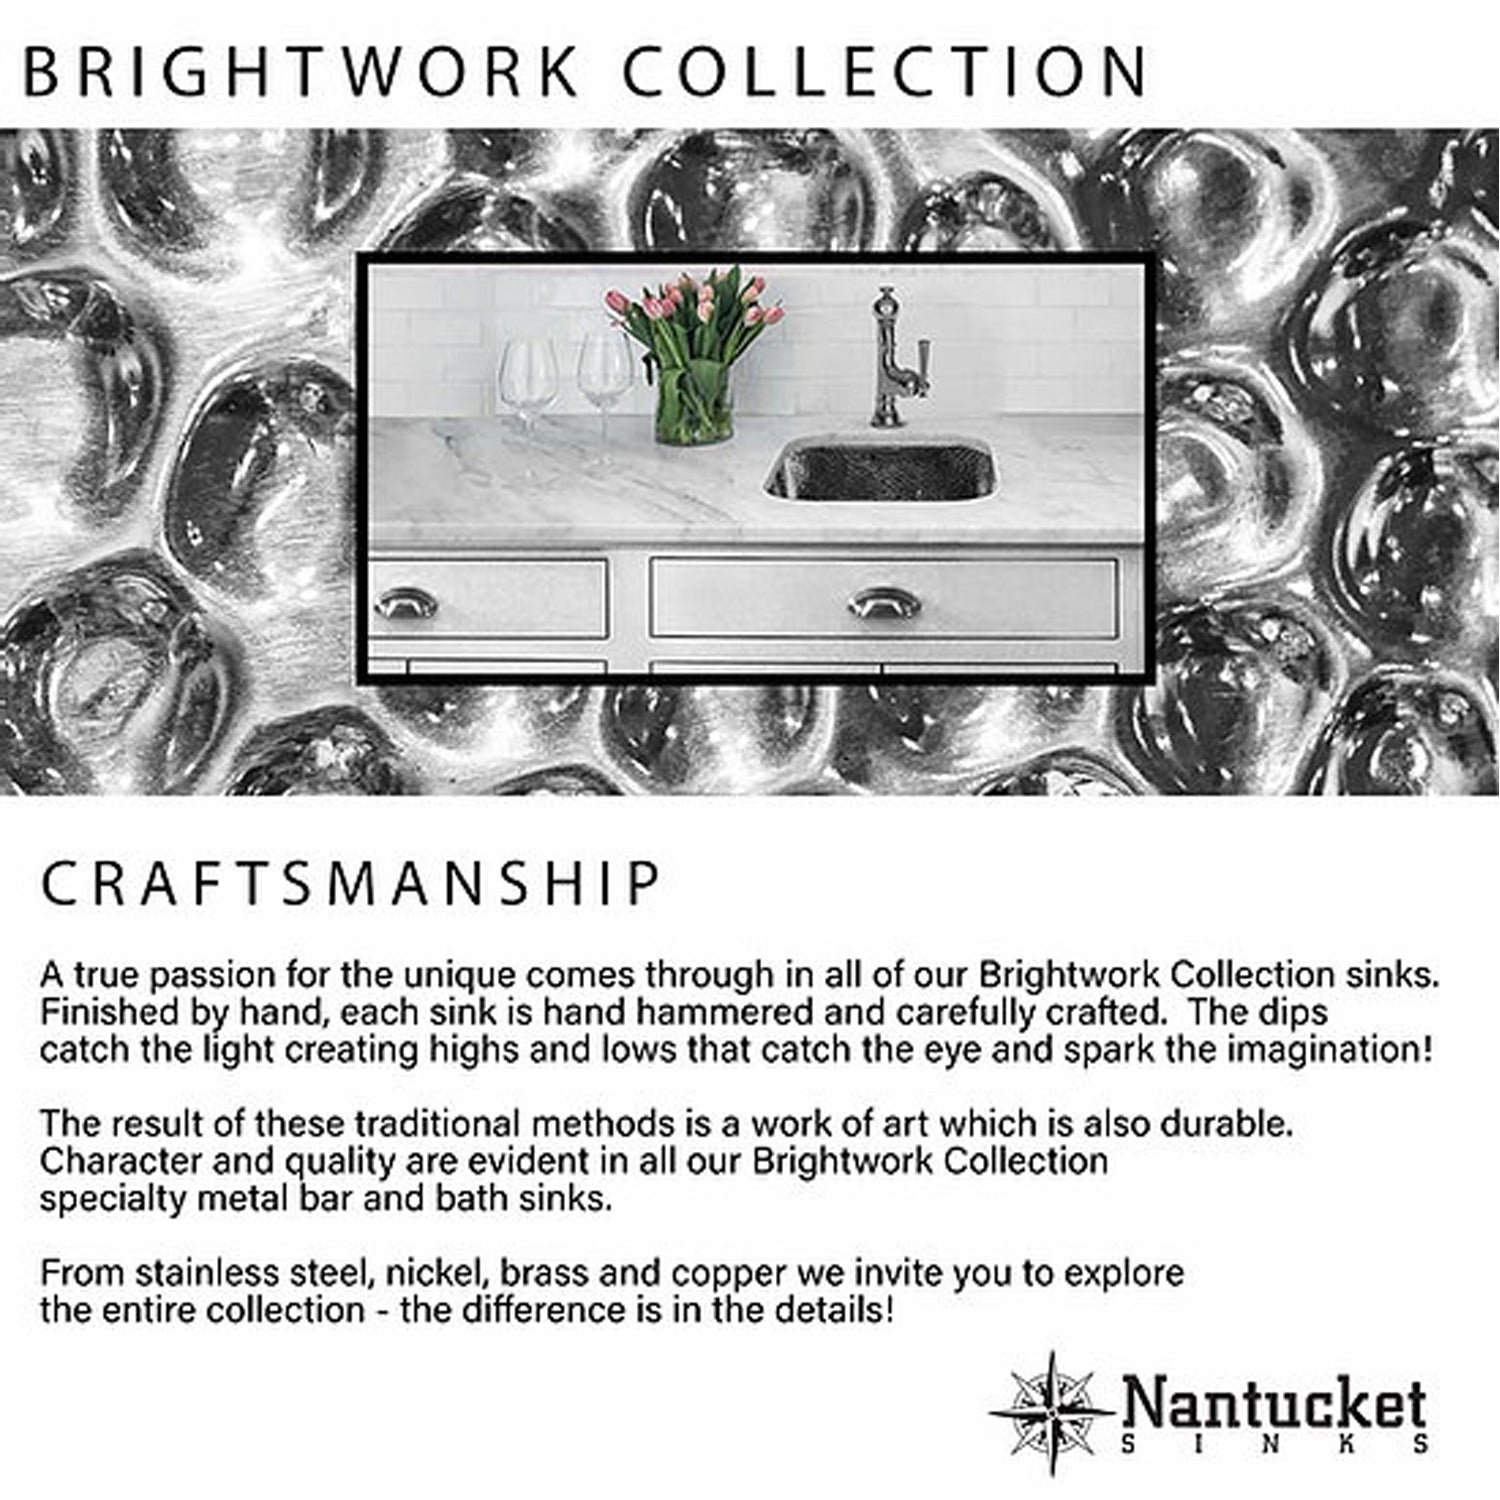 Nantucket Sinks OVS-OF 17.5-Inch x 13.75-Inch Hand Hammered Stainless Steel Oval Undermount Bathroom Sink with Overflow DirectSinks